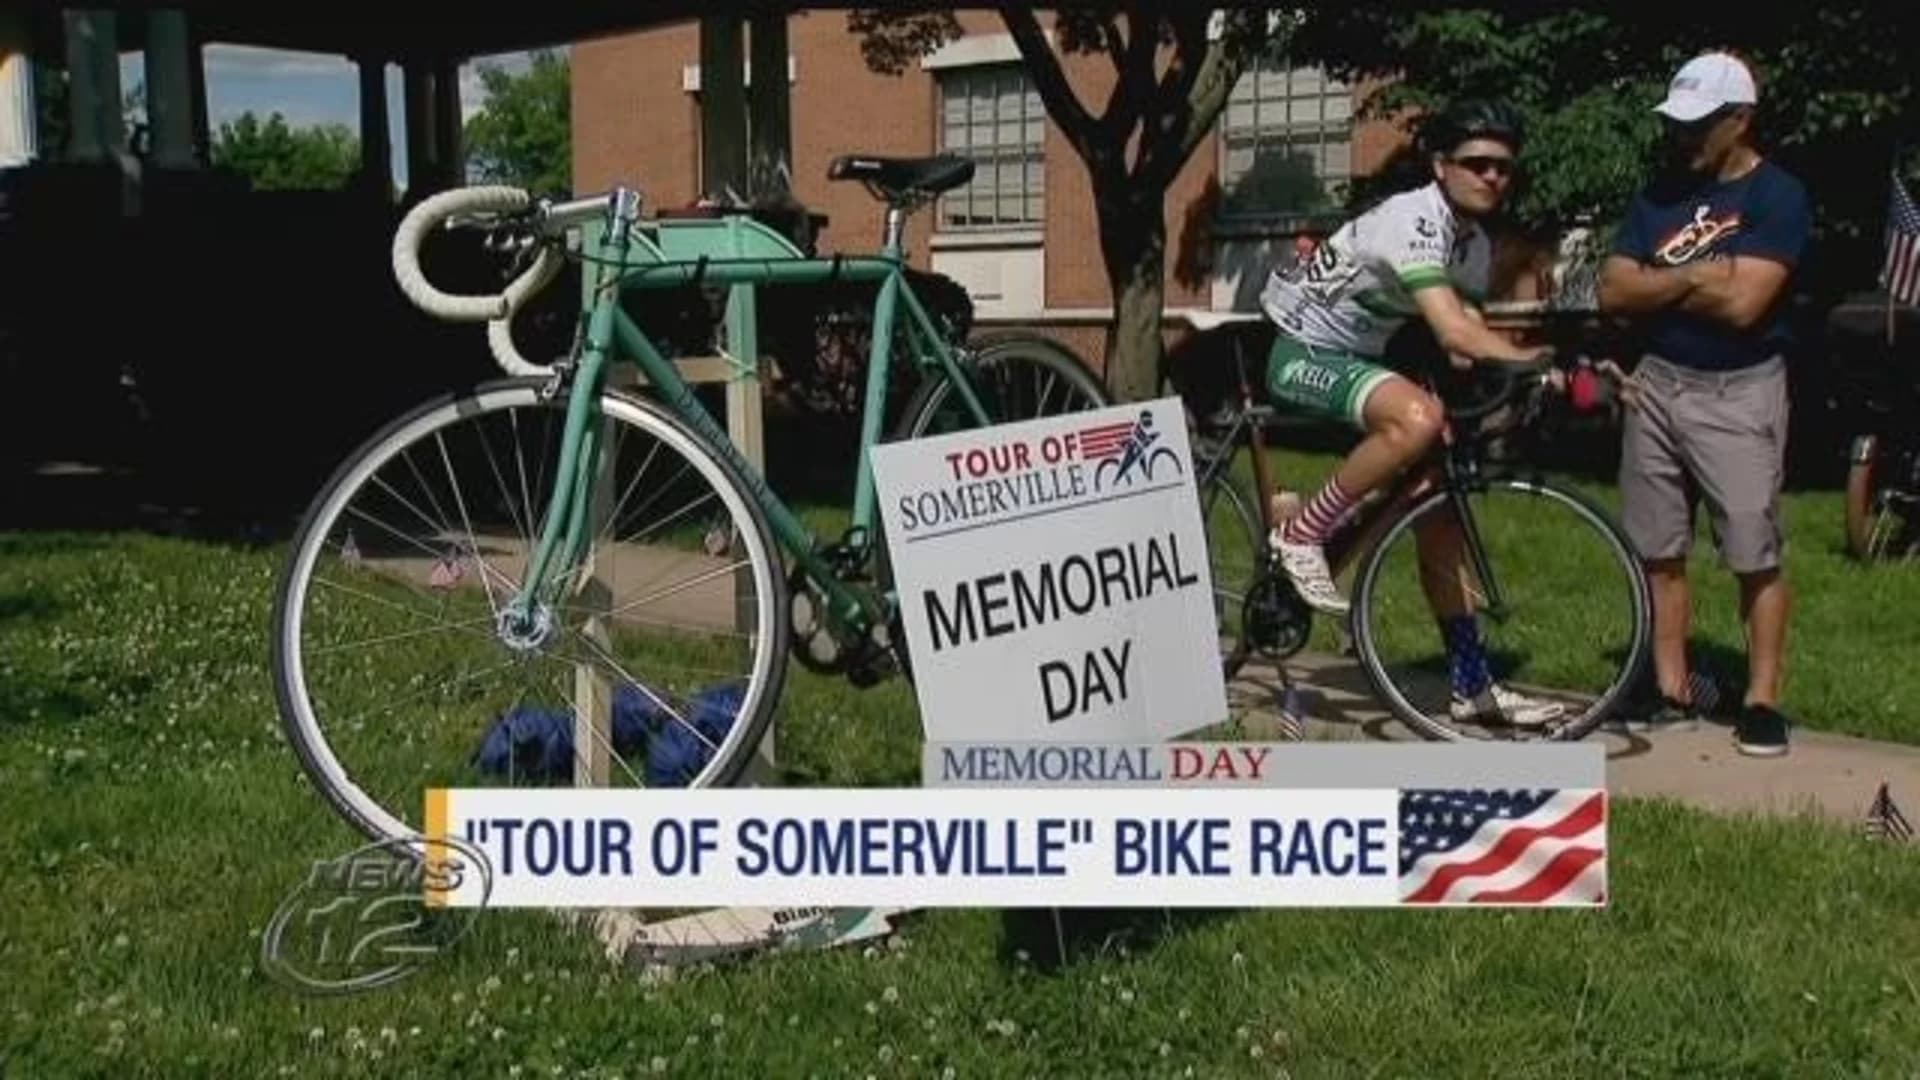 Cyclists, spectators take to Somerville streets for oldest bike race in America